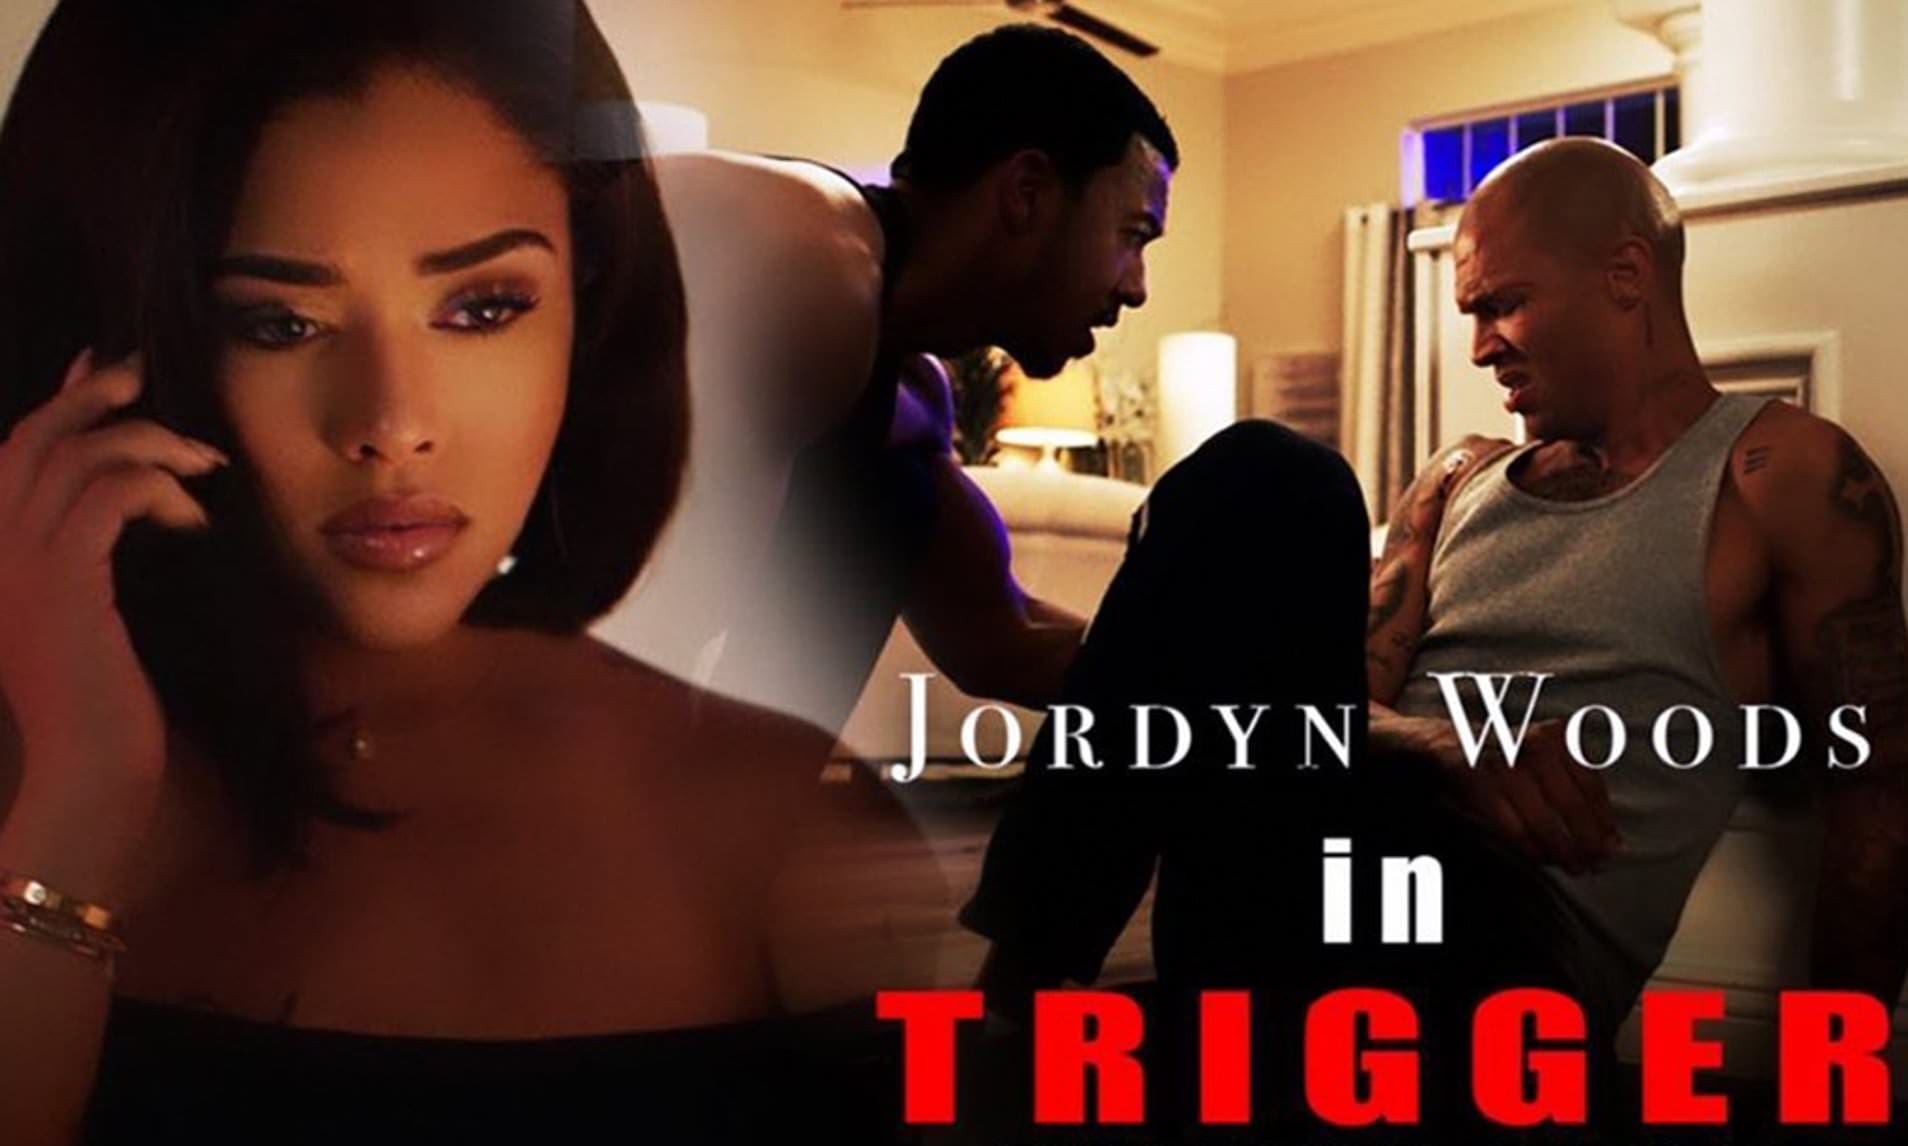 Jordyn Woods Makes Fans Crazy With Excitement, Showing Them The Trailer Of A New Music She's Starring In